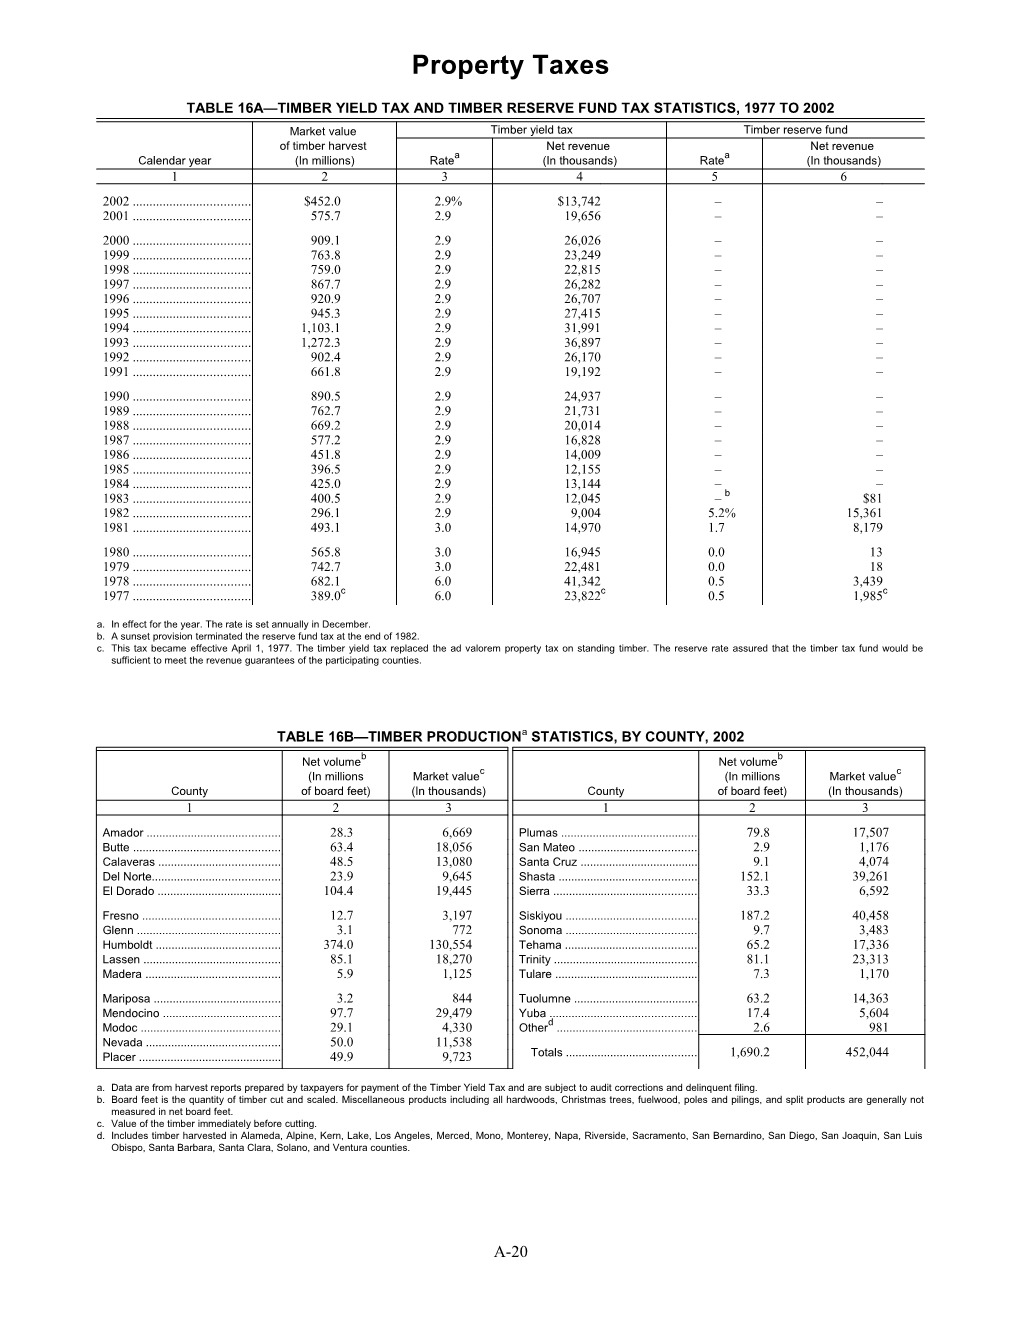 Table 16A Timber Yield Tax and Timber Reserve Fund Tax Statistics, 1977 to 2002